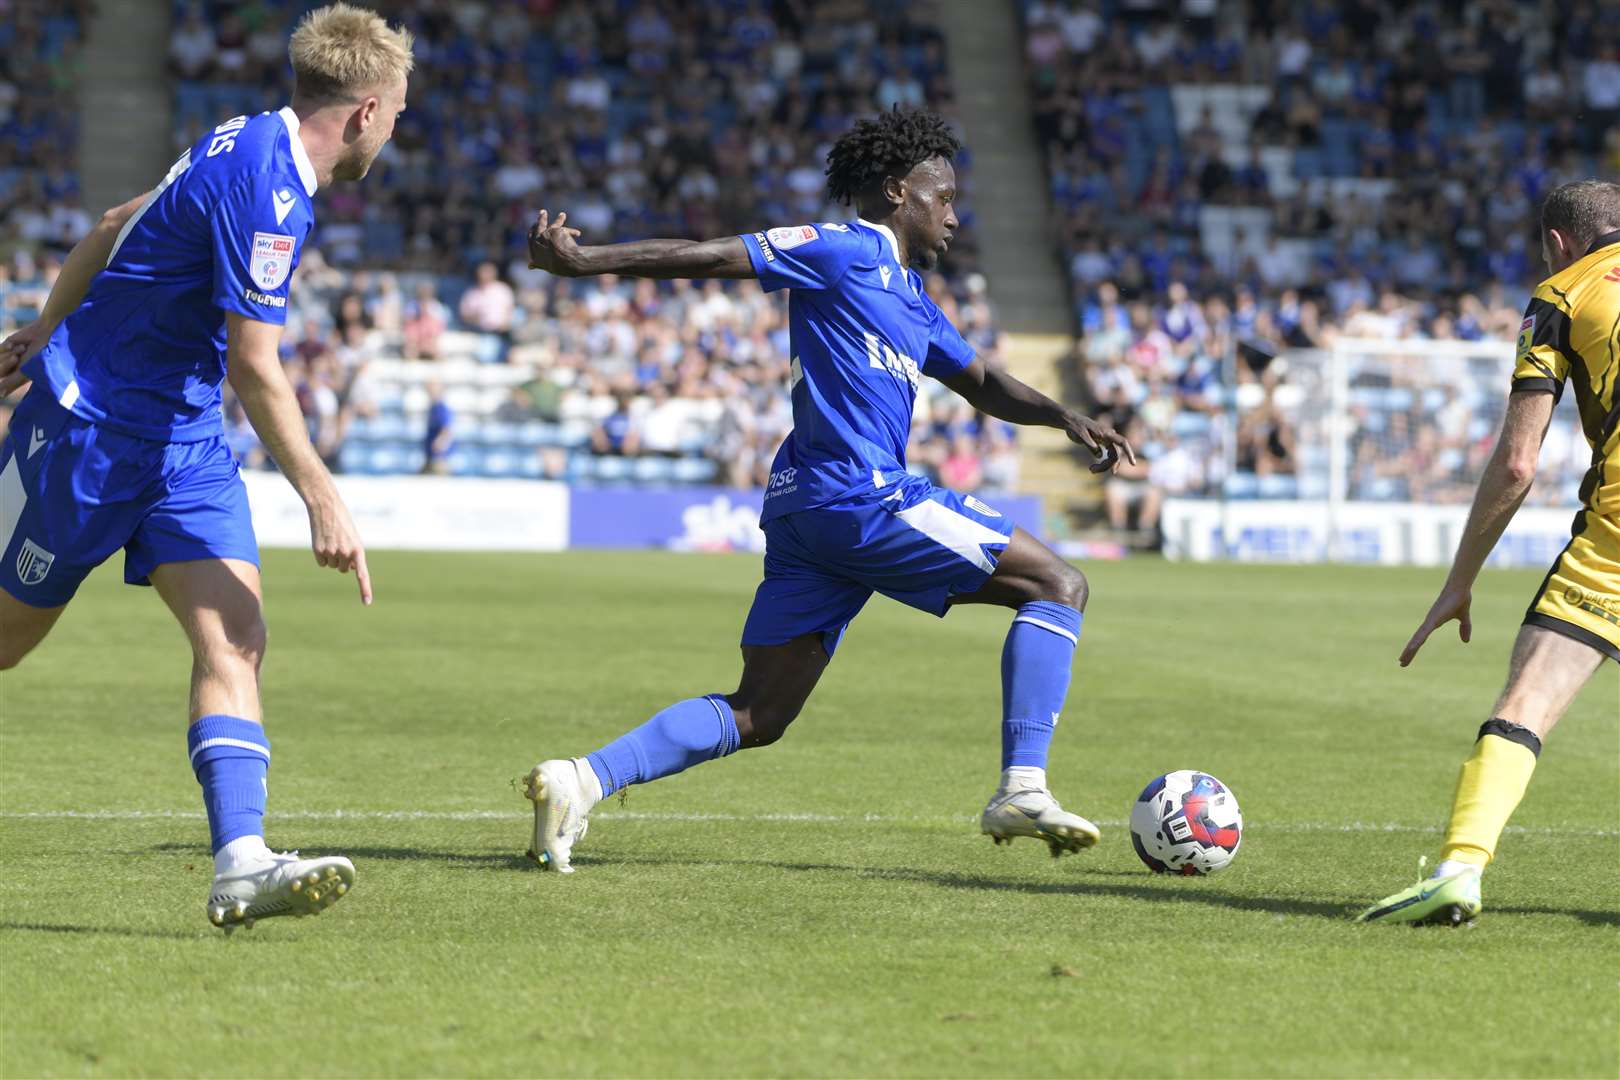 Jordan Green pushes forward for Gillingham at the weekend. Picture: Barry Goodwin